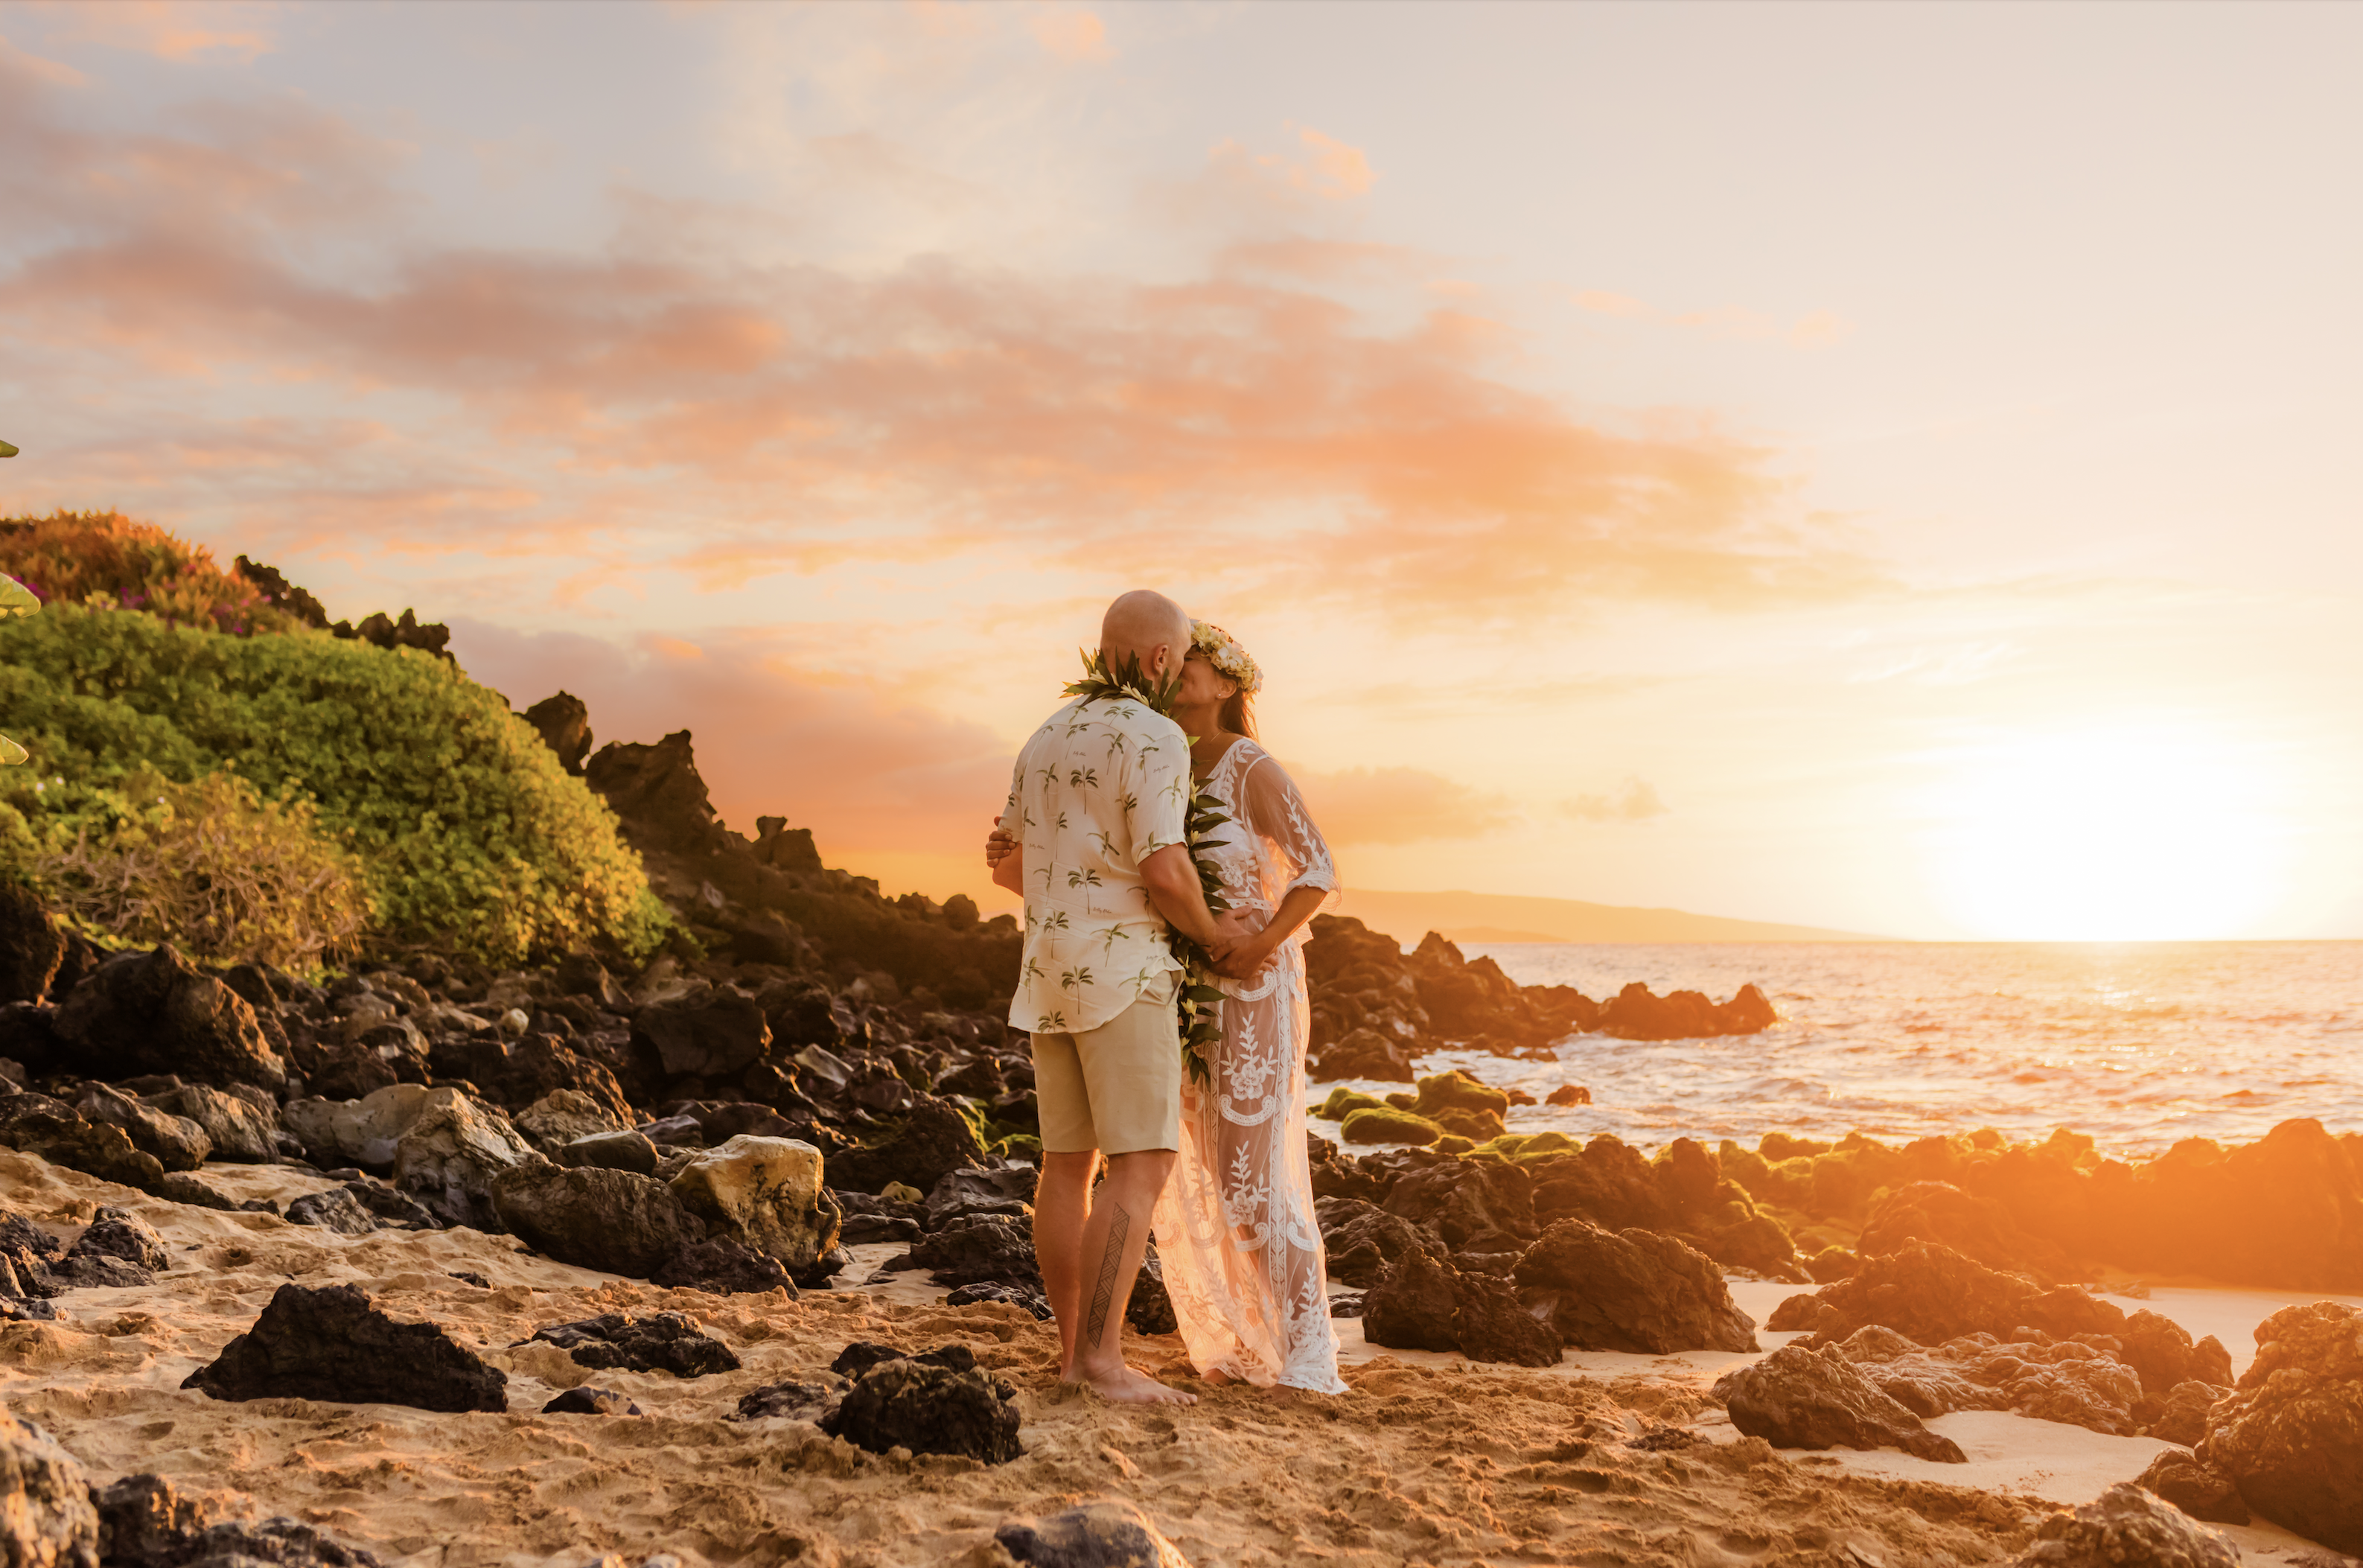 couple kiss at sunset, woman is pregnant and celebrating a maui vow renewal in wailea